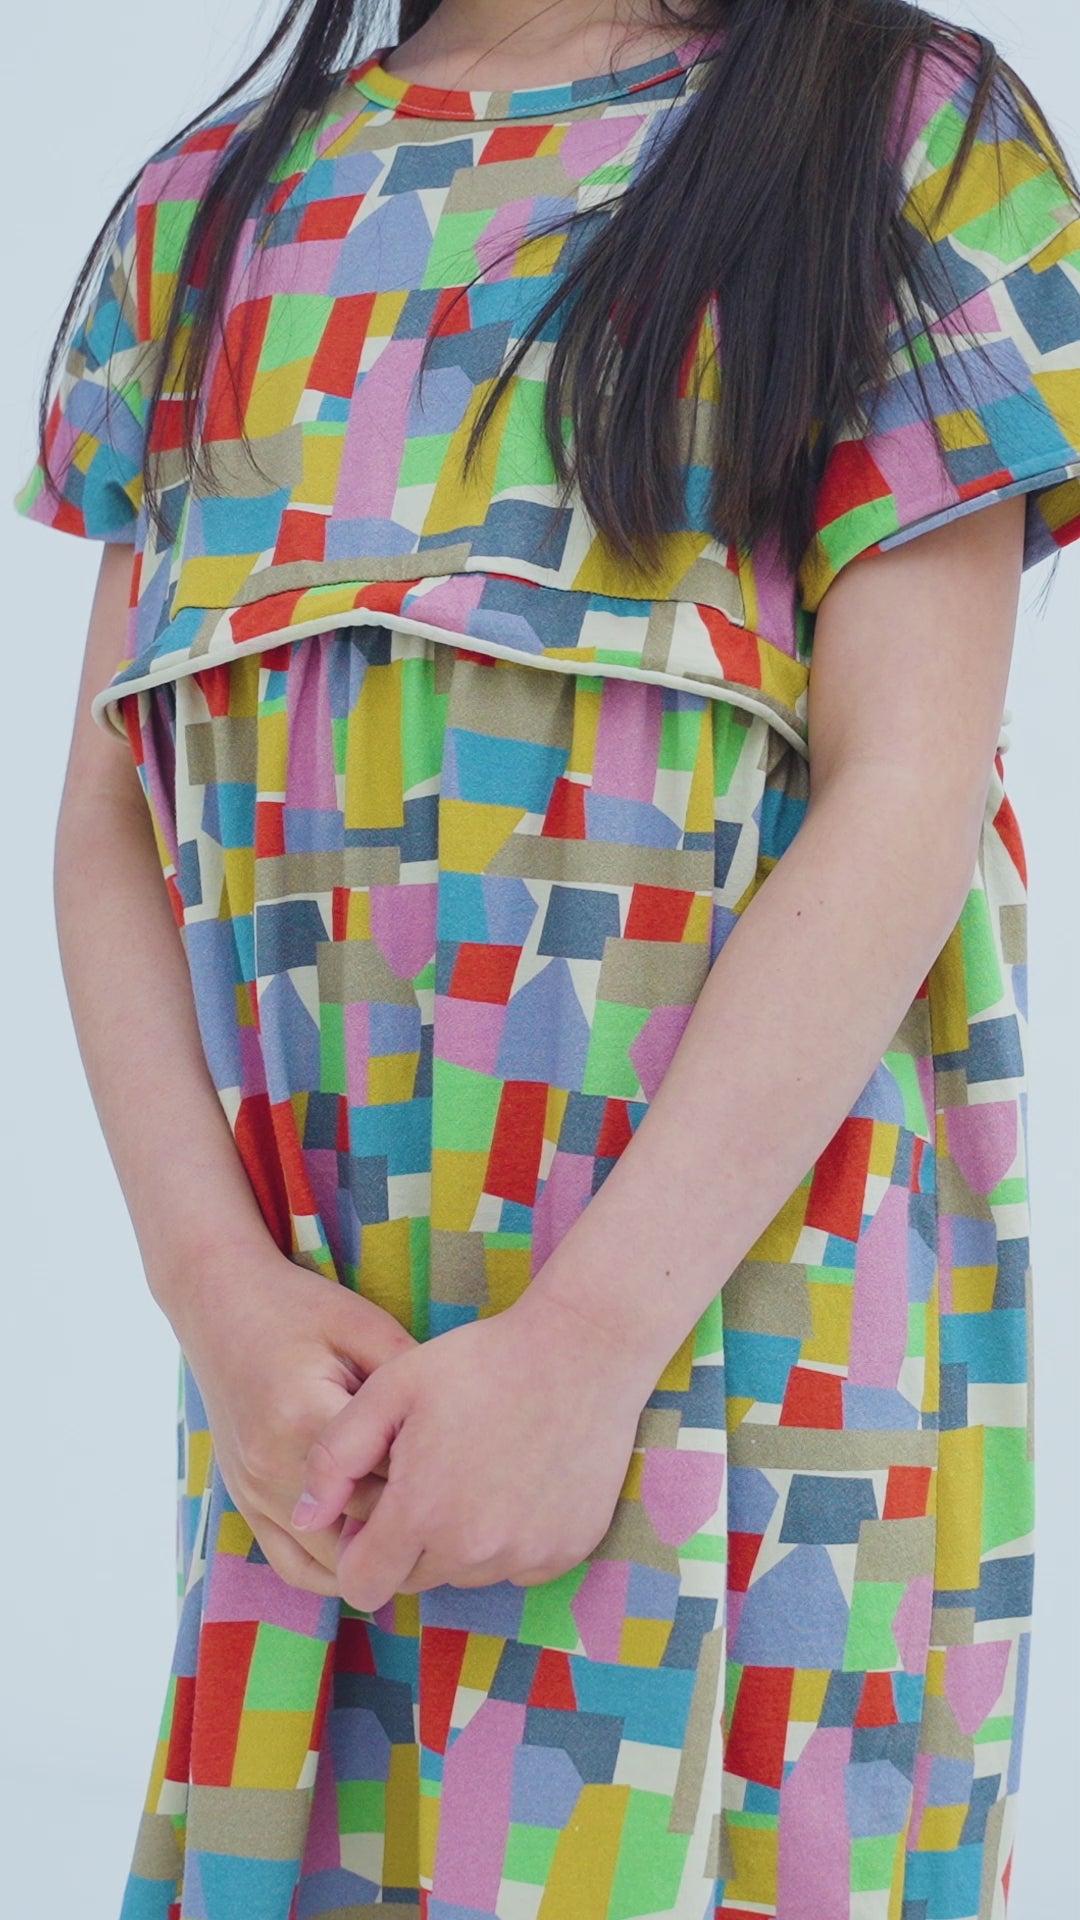 dress of clouds - graphic color block